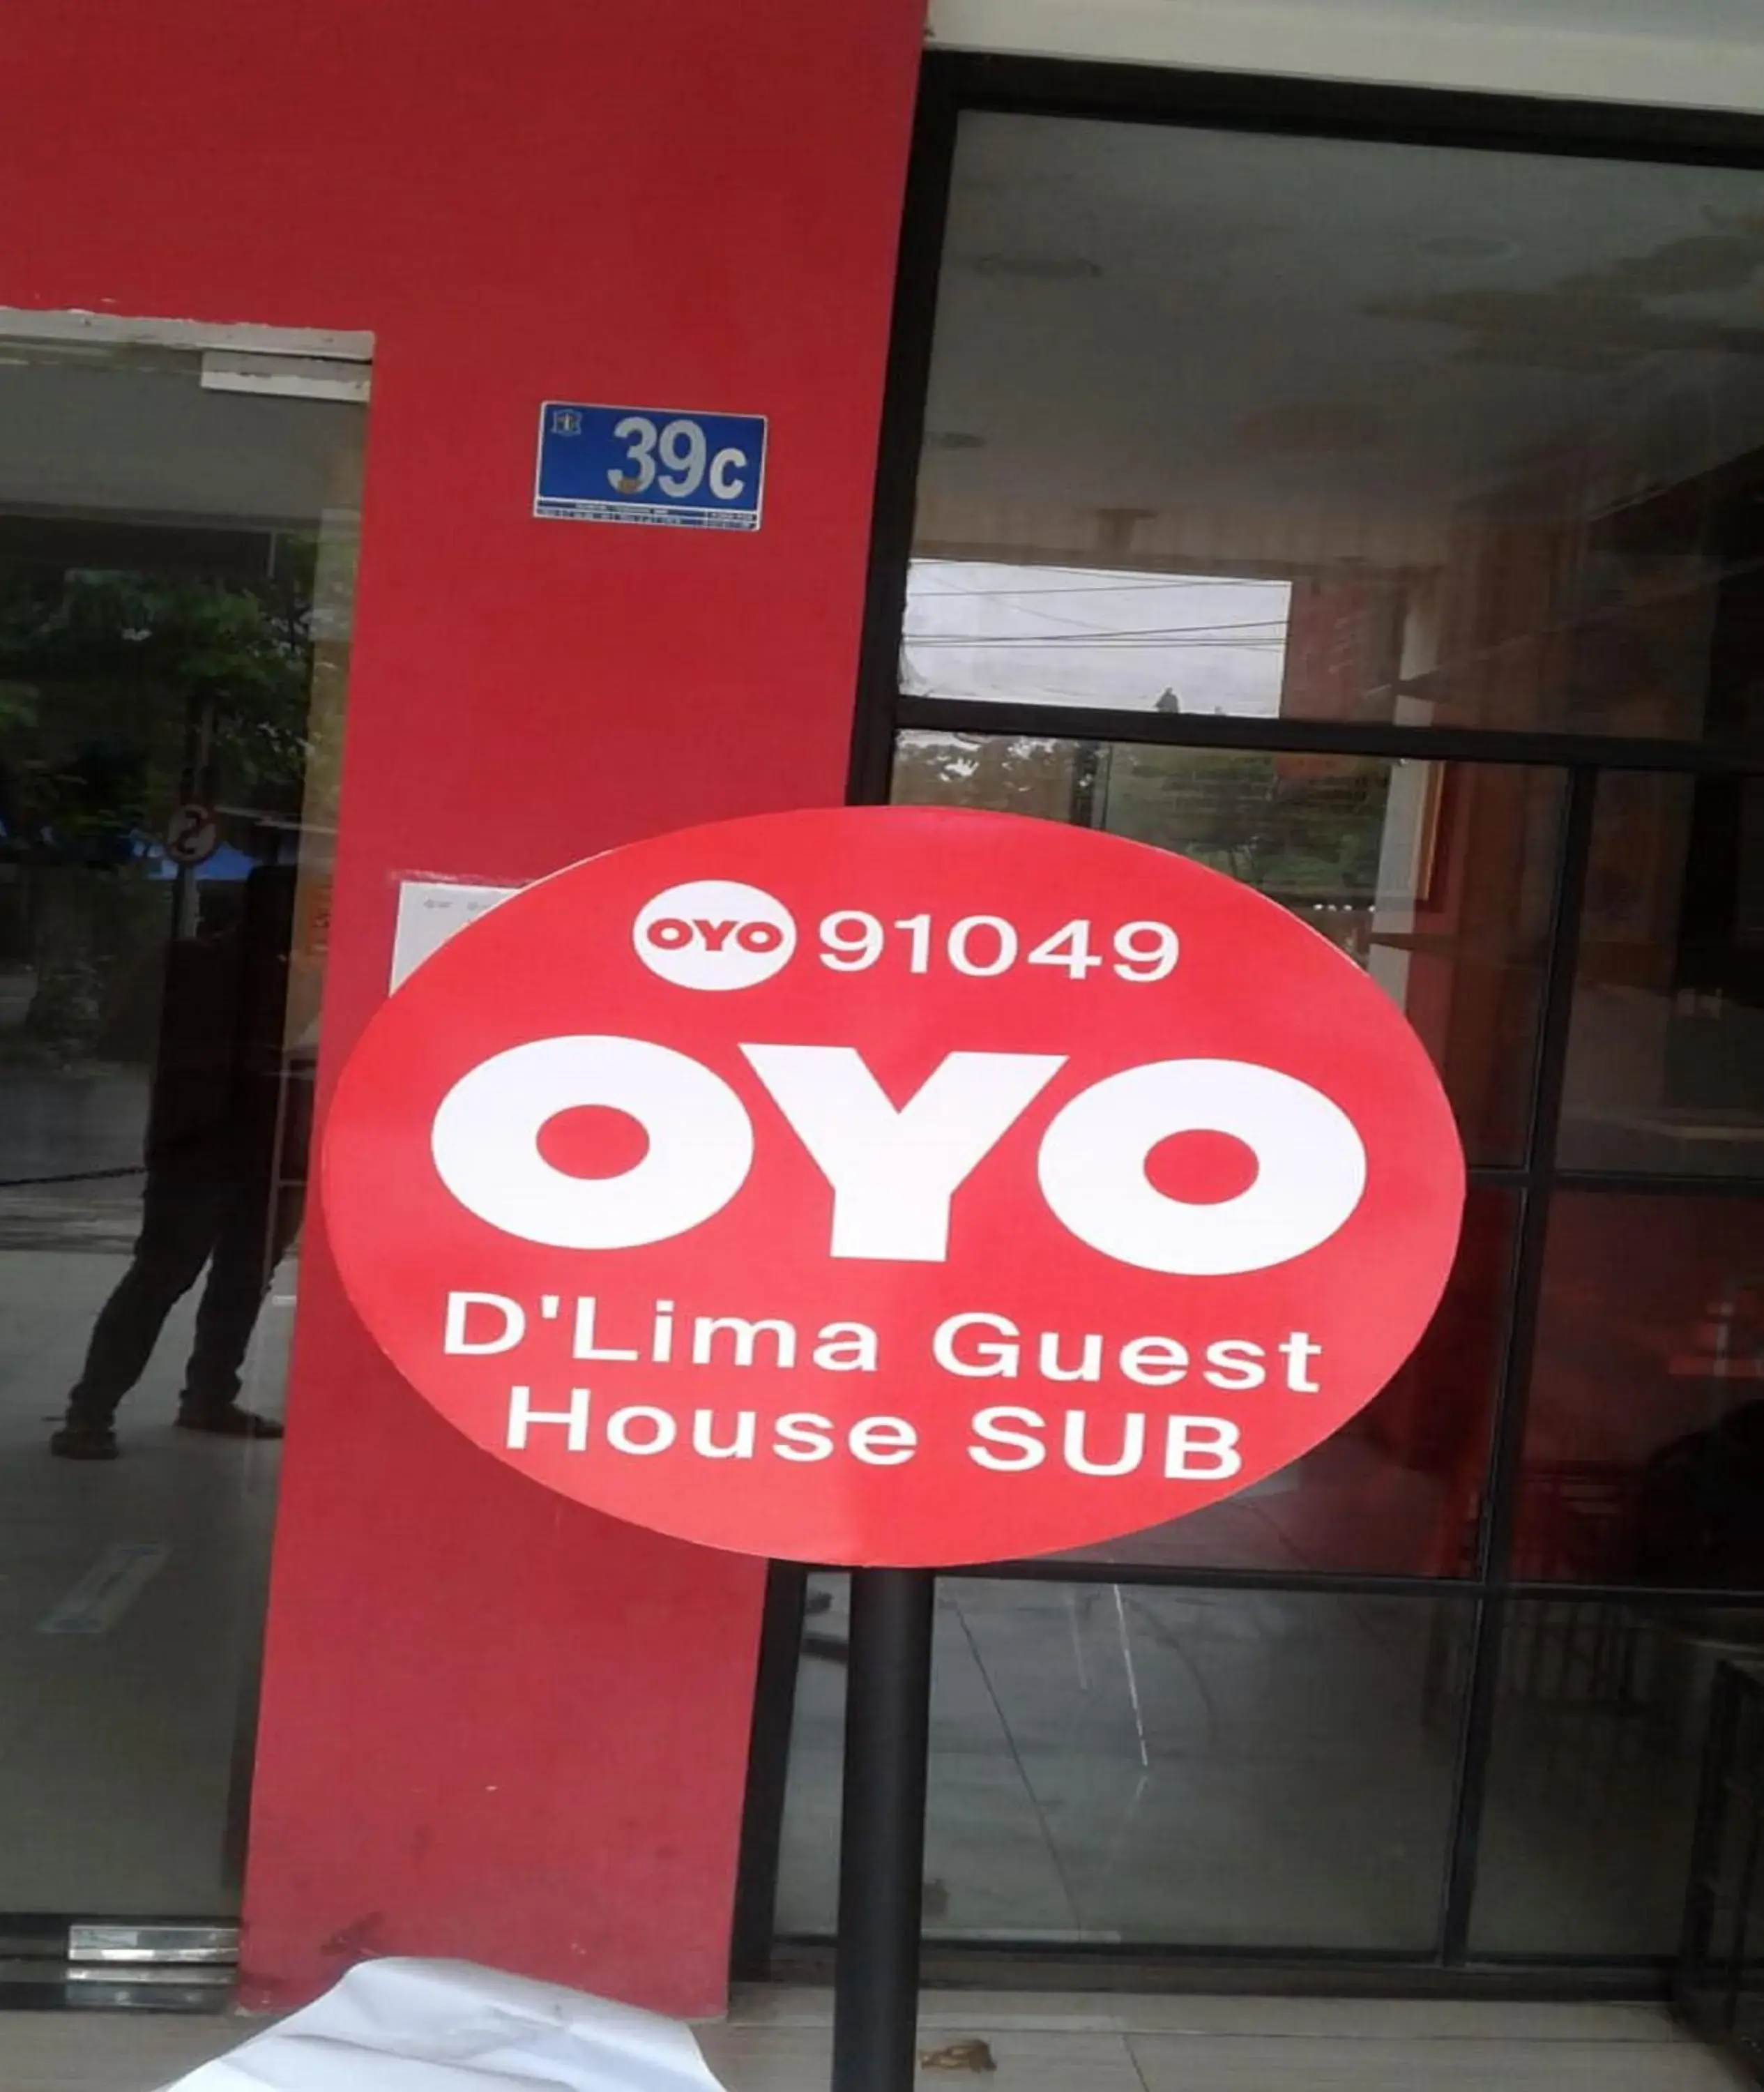 Property logo or sign in OYO 91049 D'lima Guest House Sub